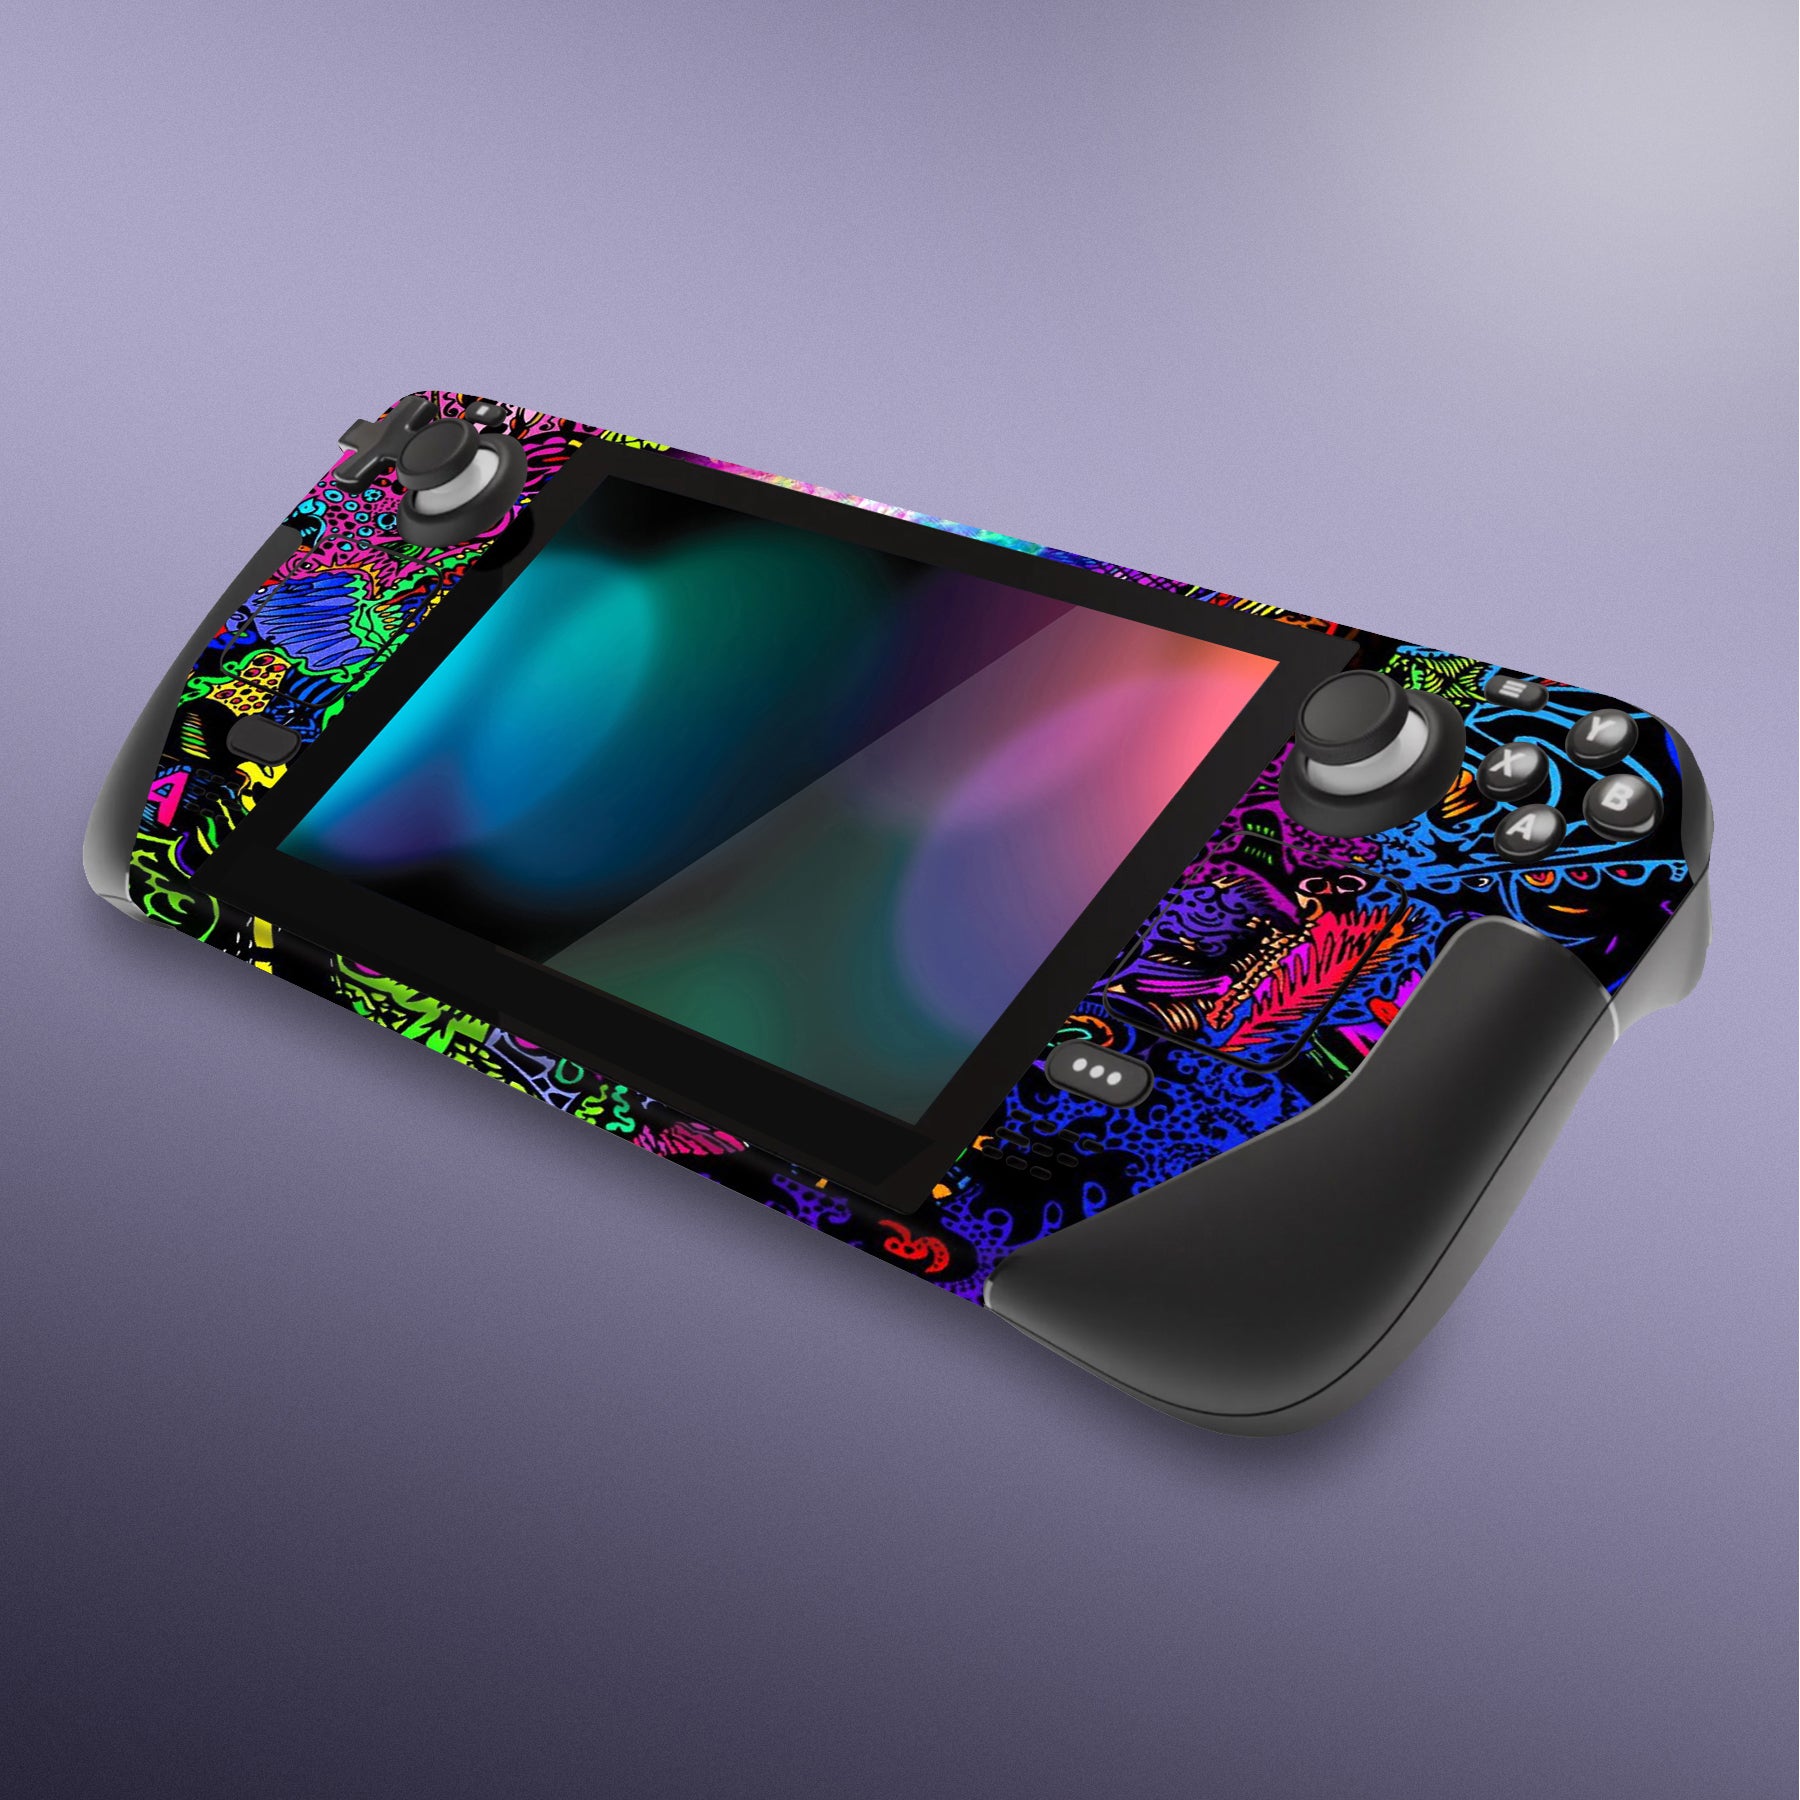 PlayVital Full Set Protective Skin Decal for Steam Deck, Custom Stickers Vinyl Cover for Steam Deck Handheld Gaming PC - Psychedelic Leaf - SDTM007 playvital